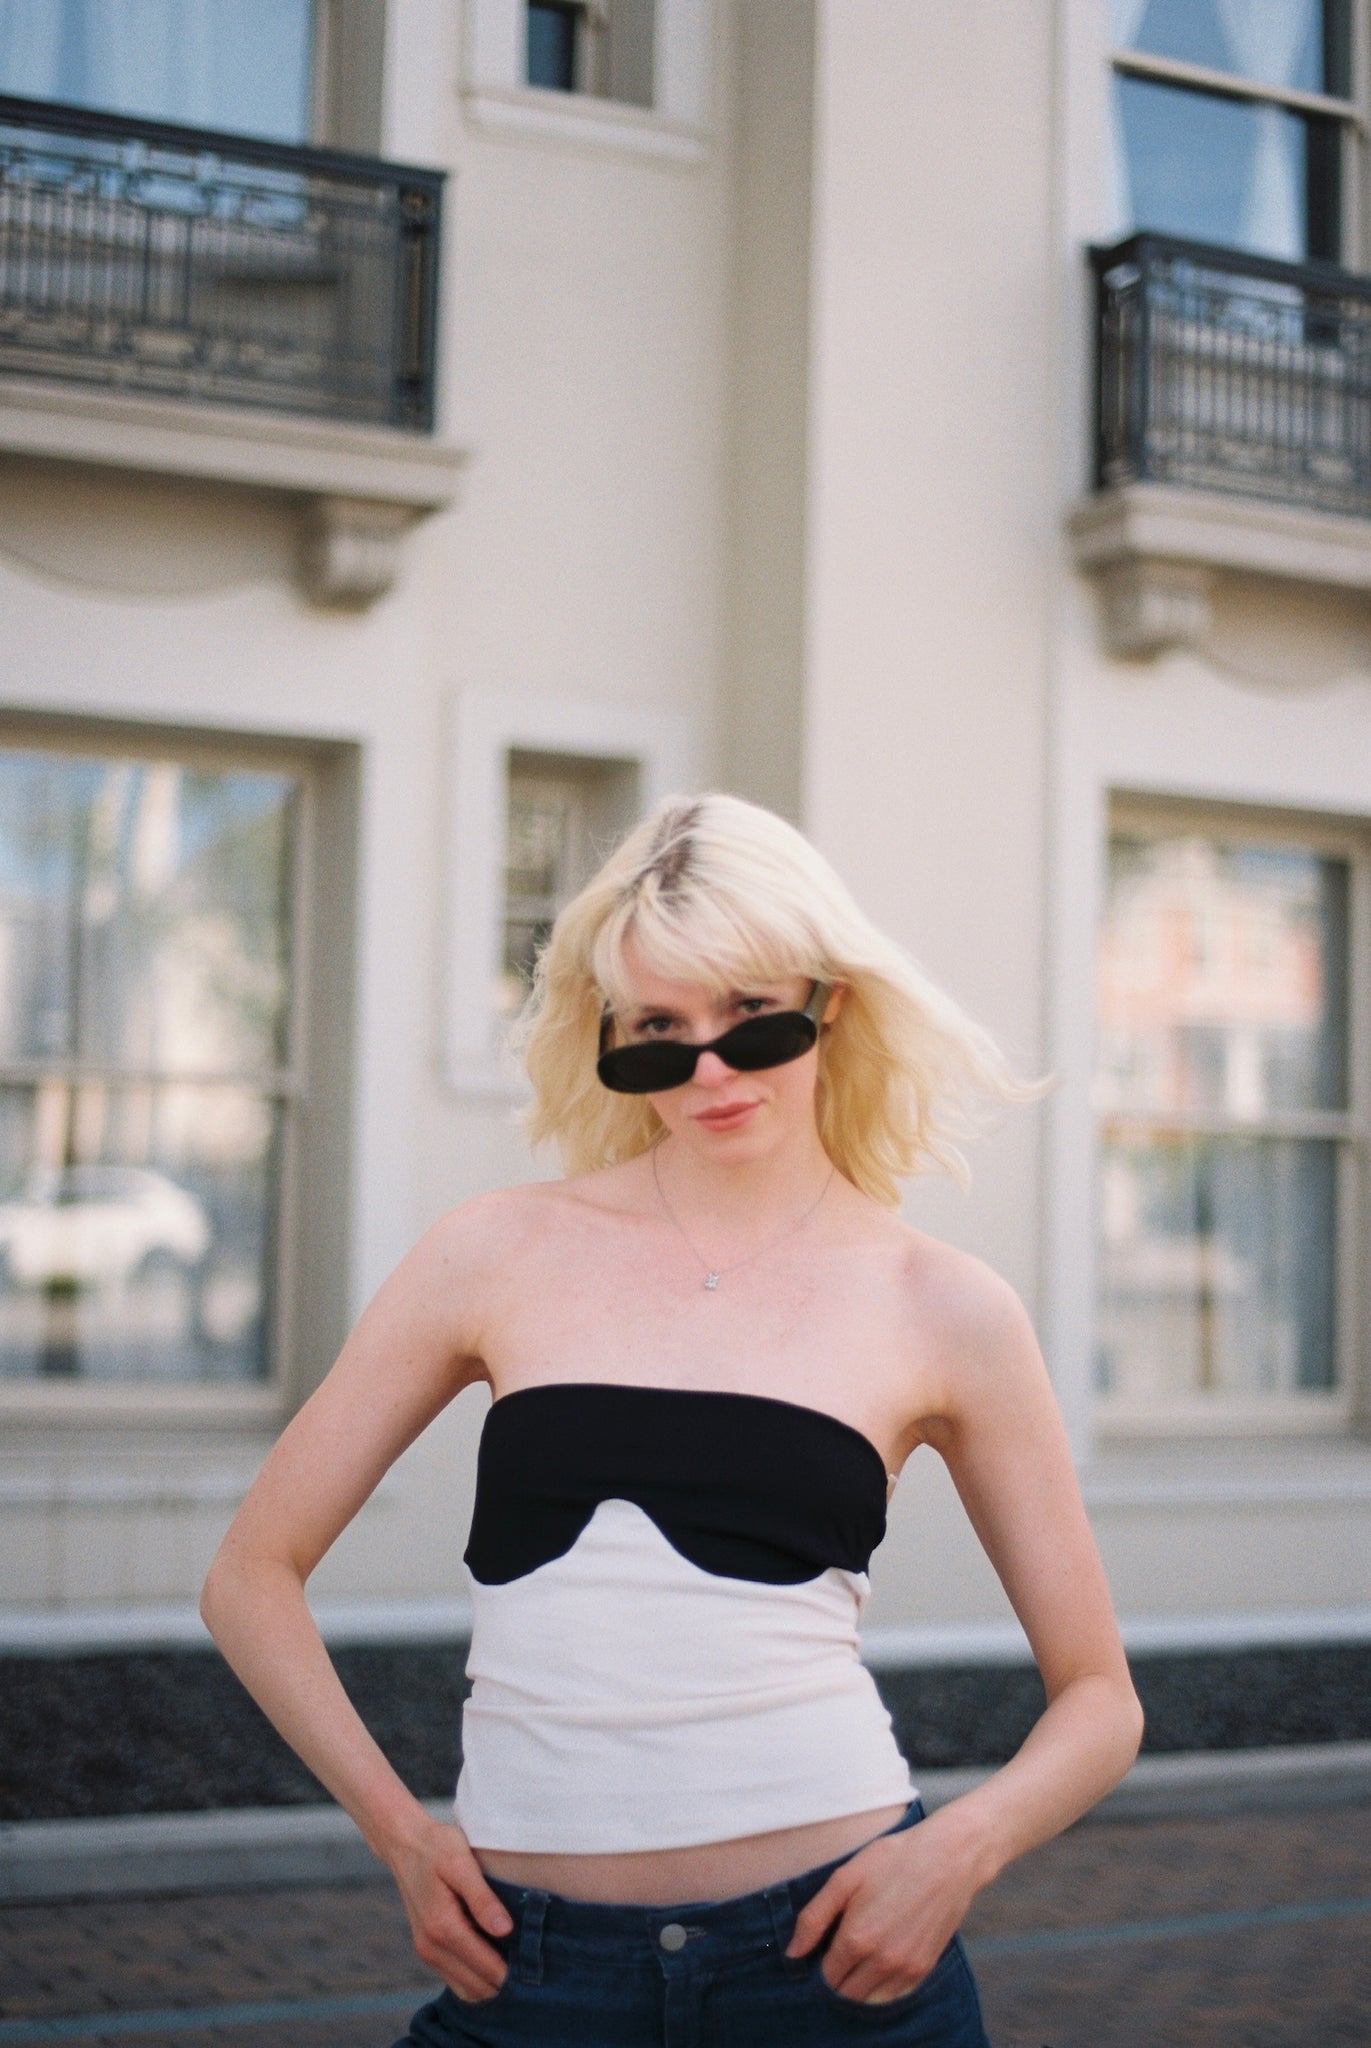 The Tea Party Tube Top